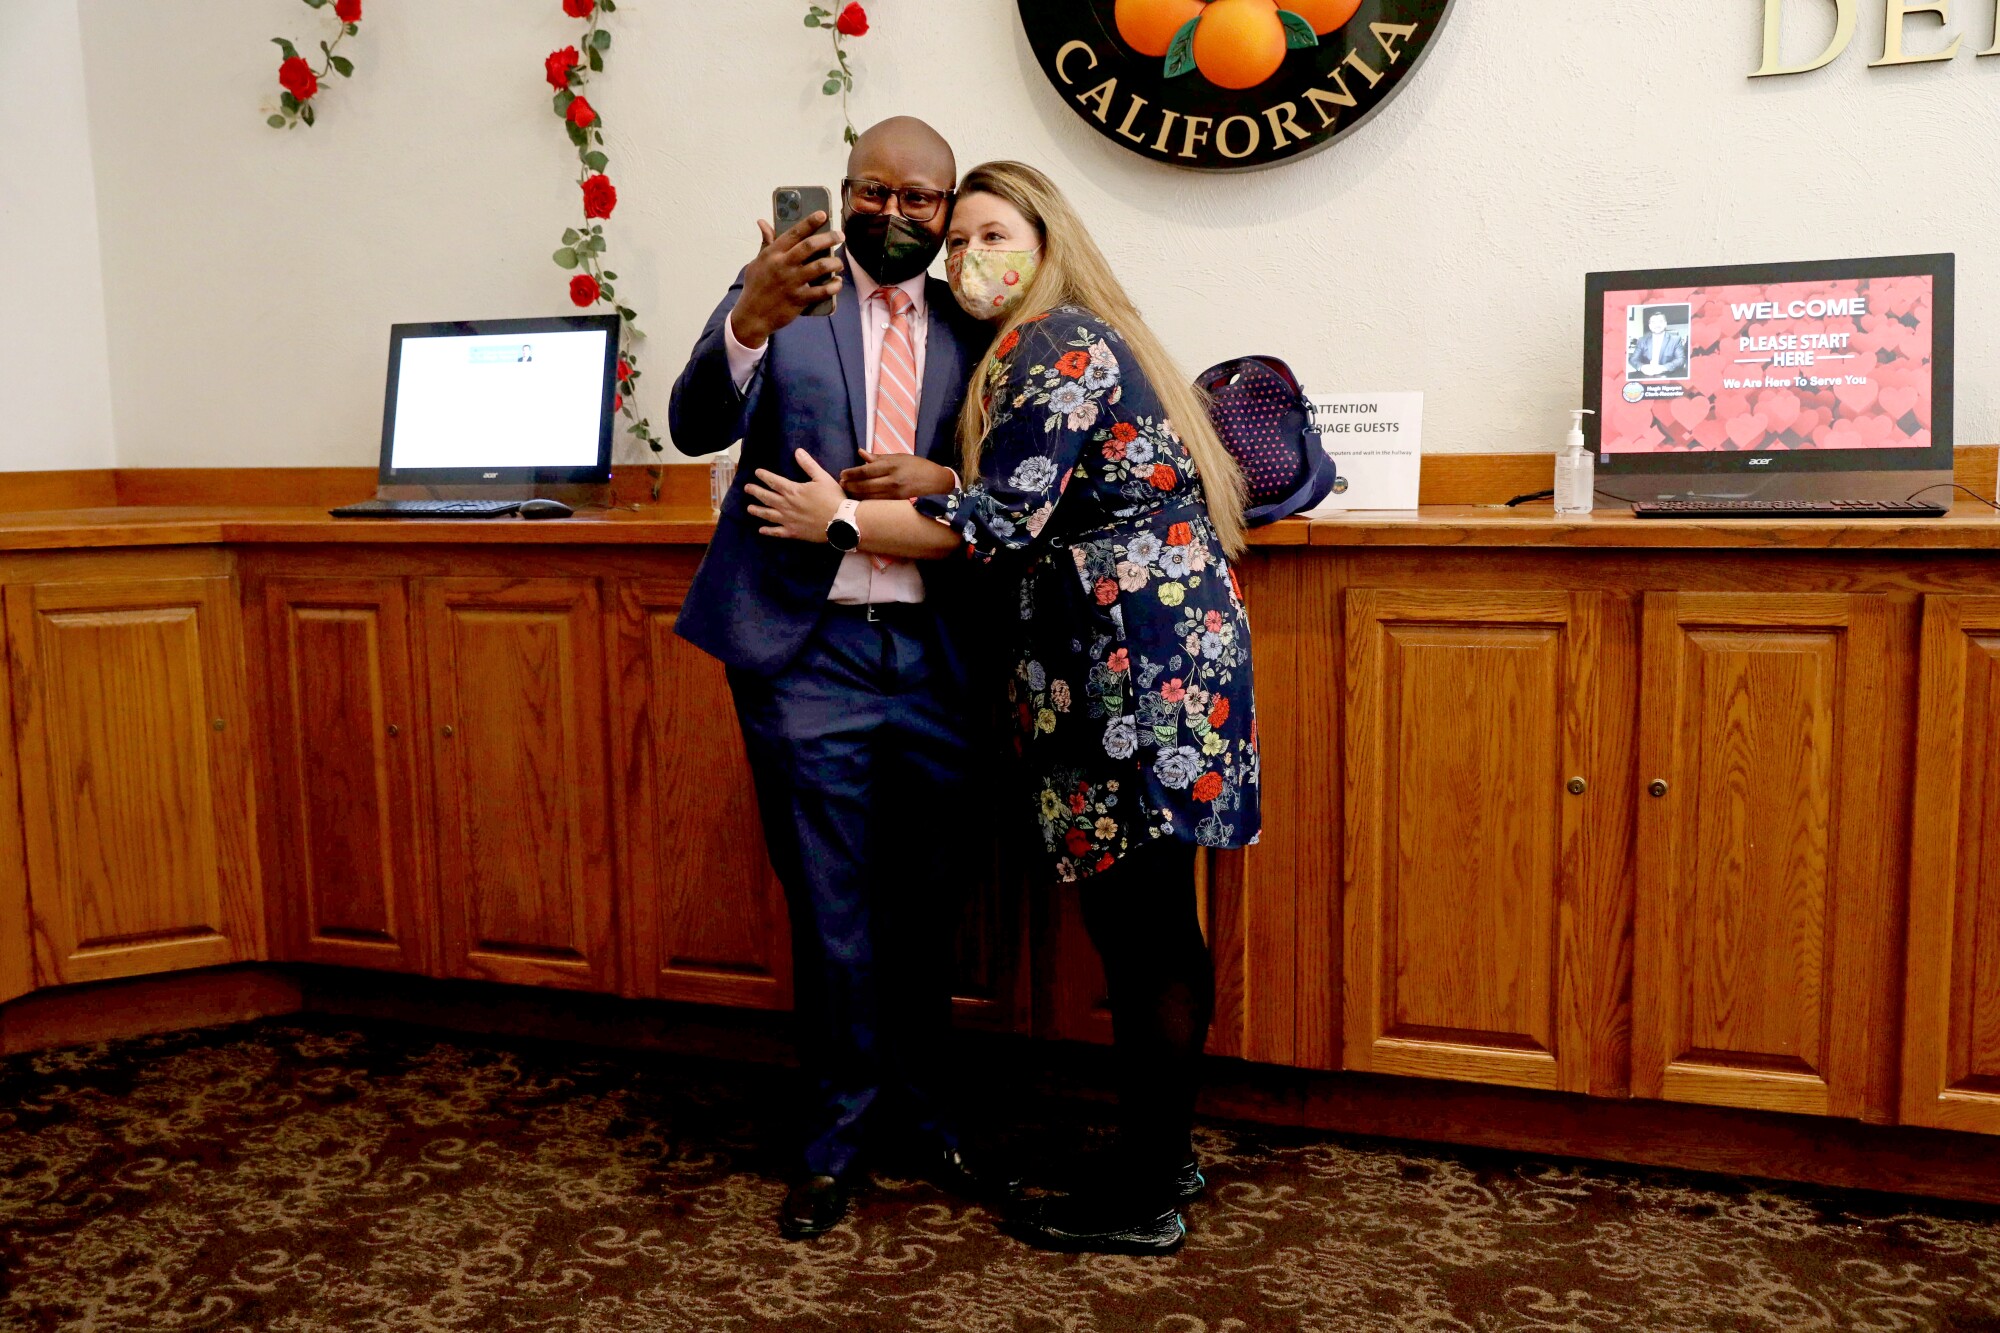 A couple takes a selfie after registering to marry on 2/22/22 at the Old County Courthouse in downtown Santa Ana.